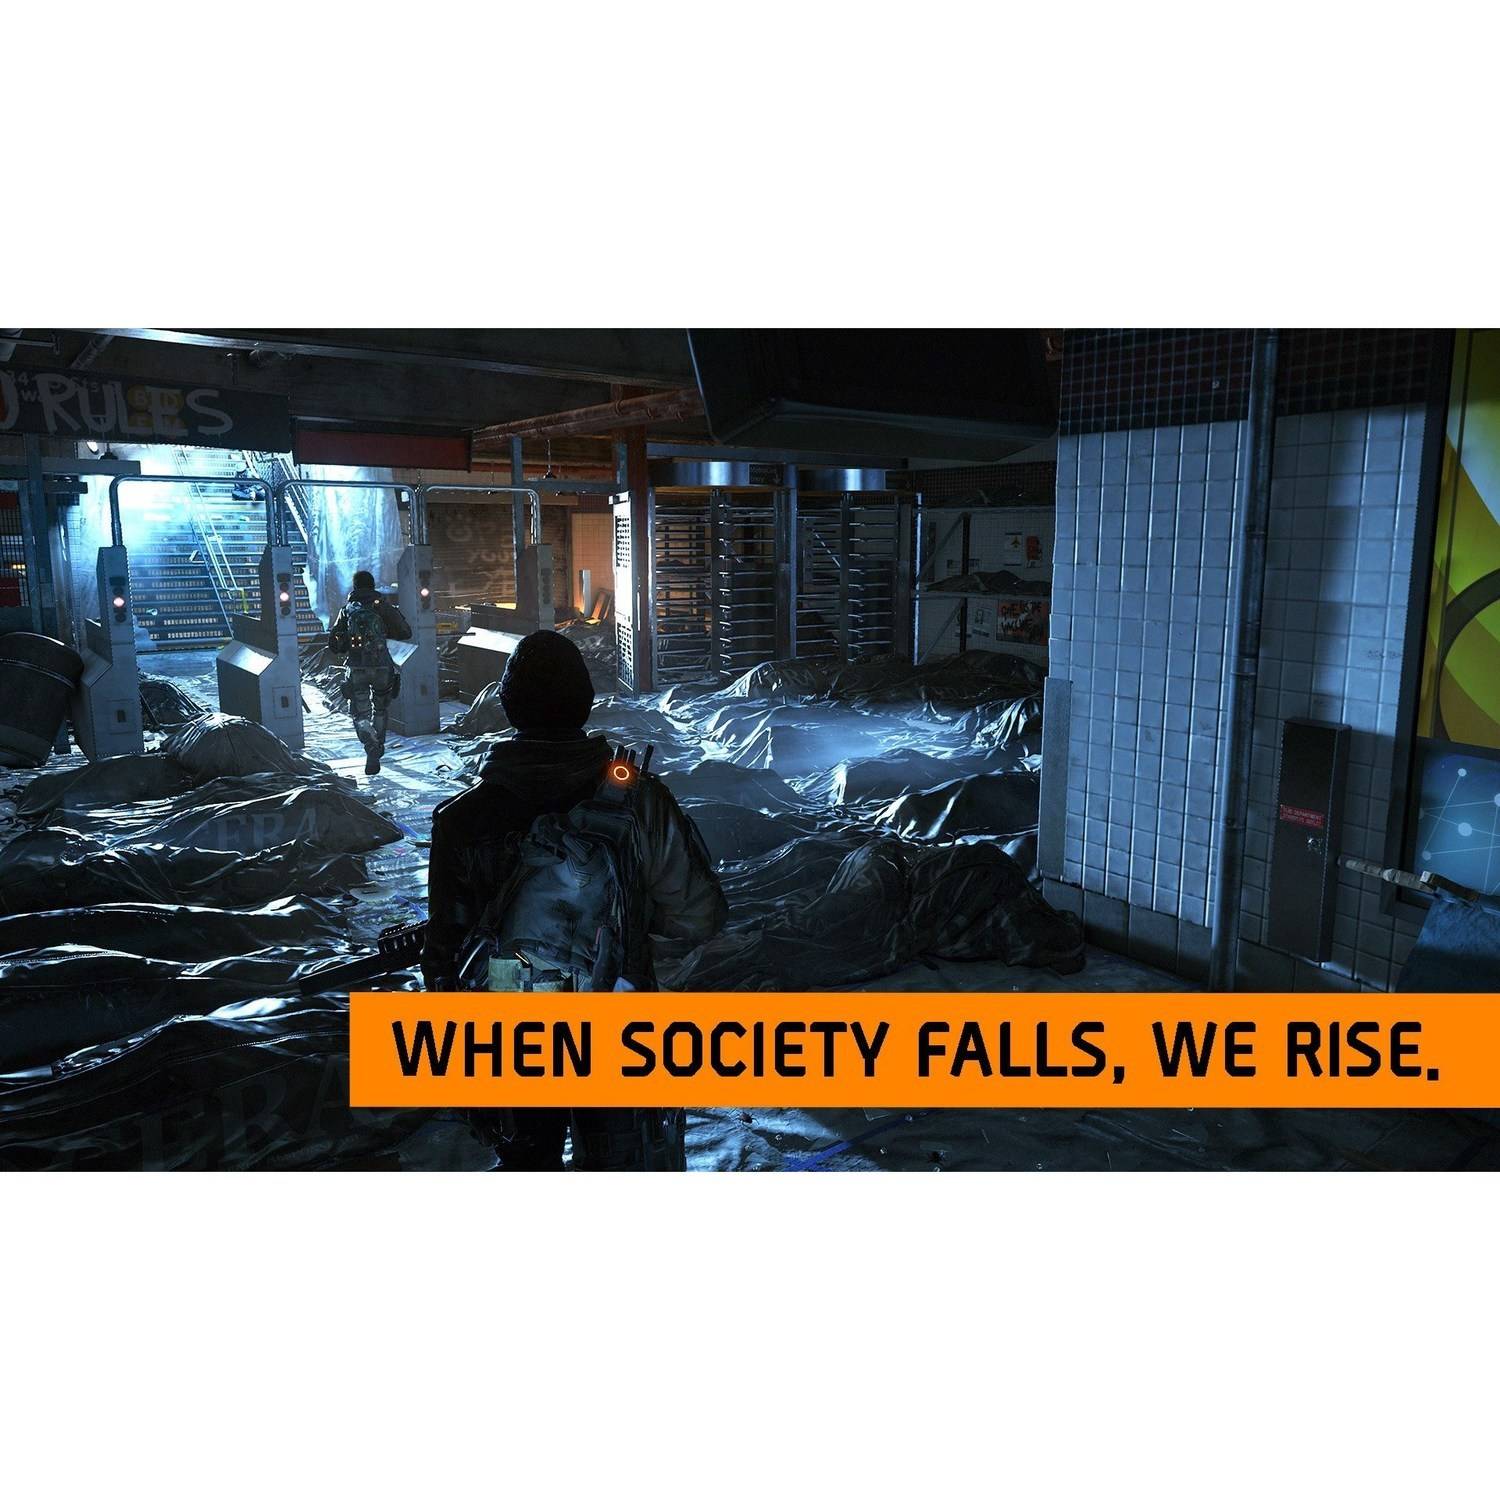 Tom Clancy's: The Division, Ubisoft, Xbox One, 887256014513 - image 3 of 7